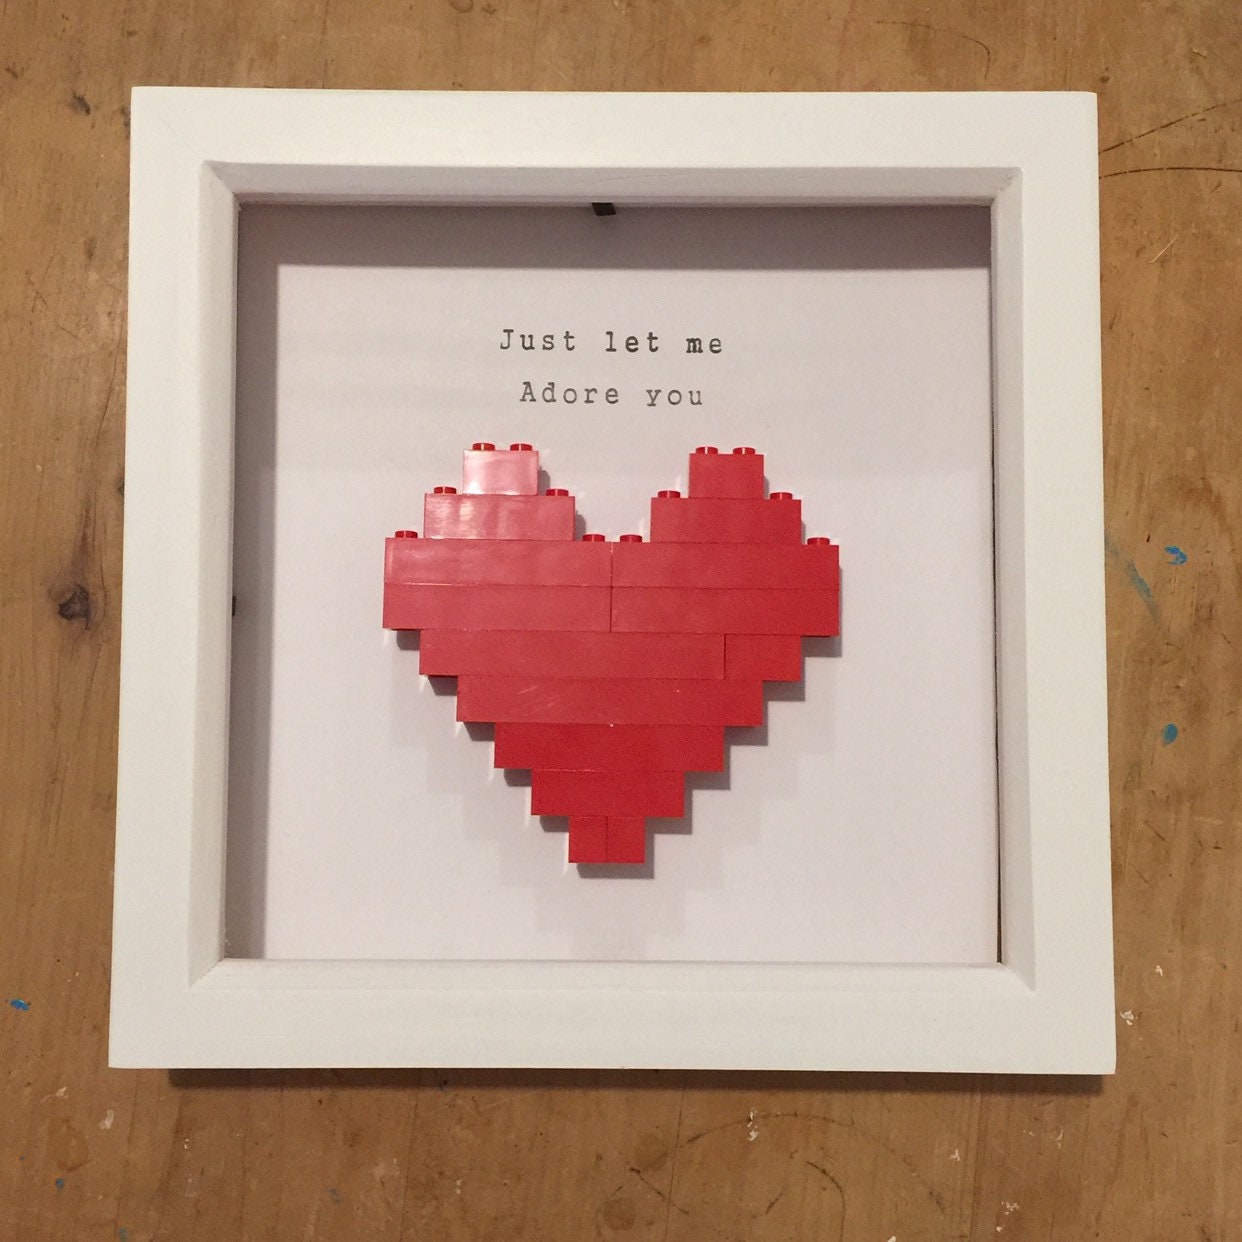 Lego Heart in wooden frame with hand printed quote Just let me